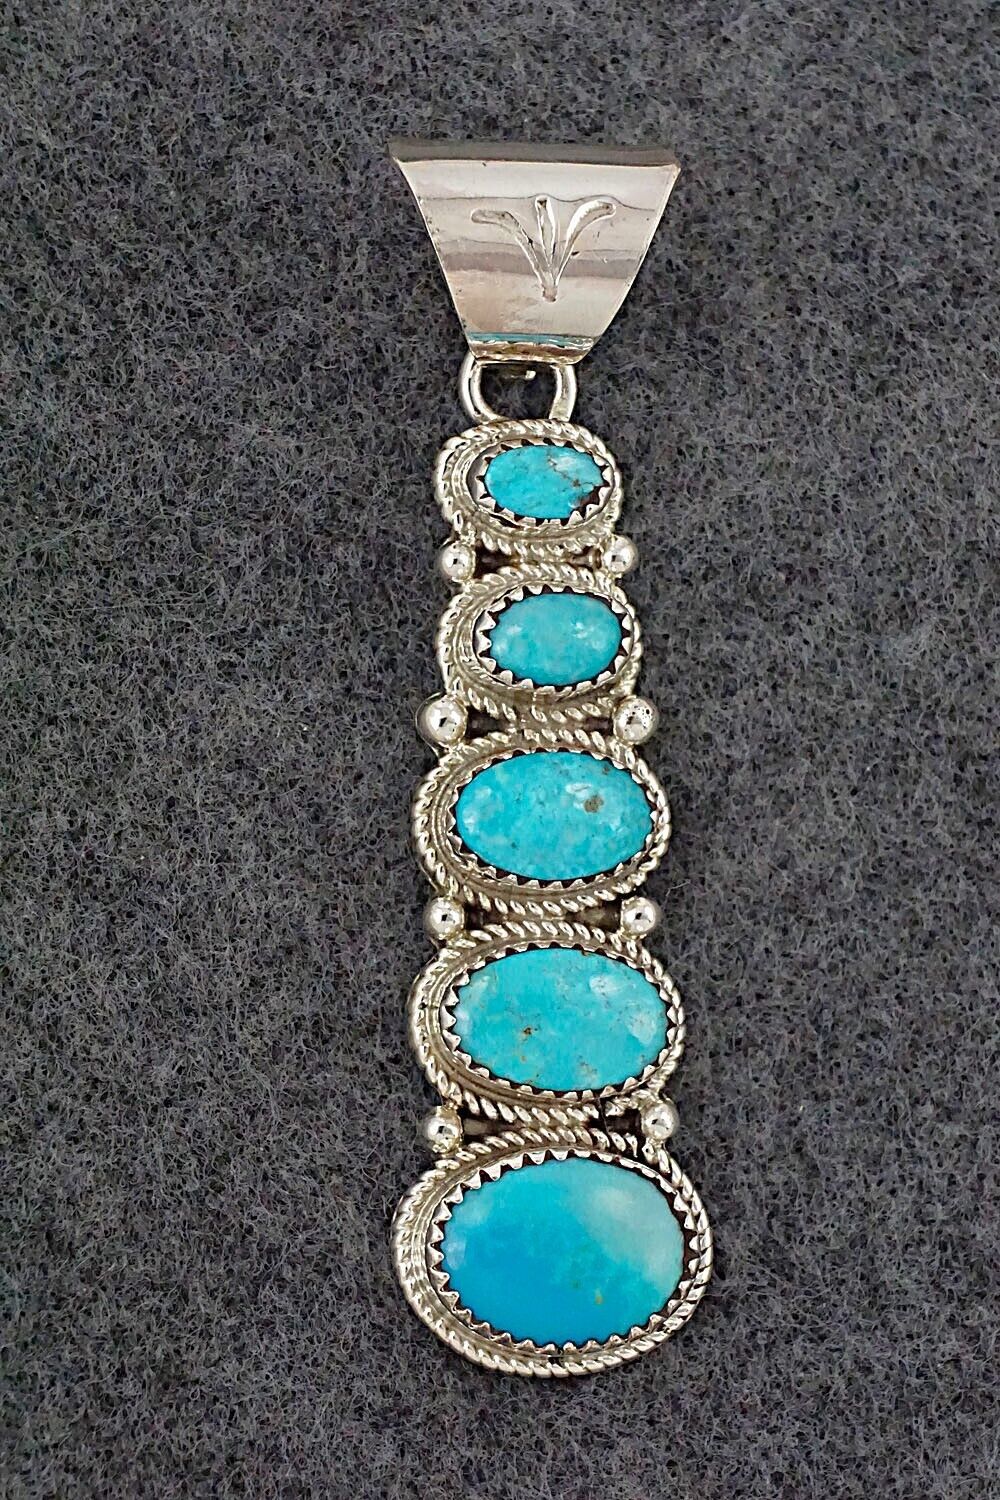 Turquoise & Sterling Silver Pendant - Ernest Hawthorne